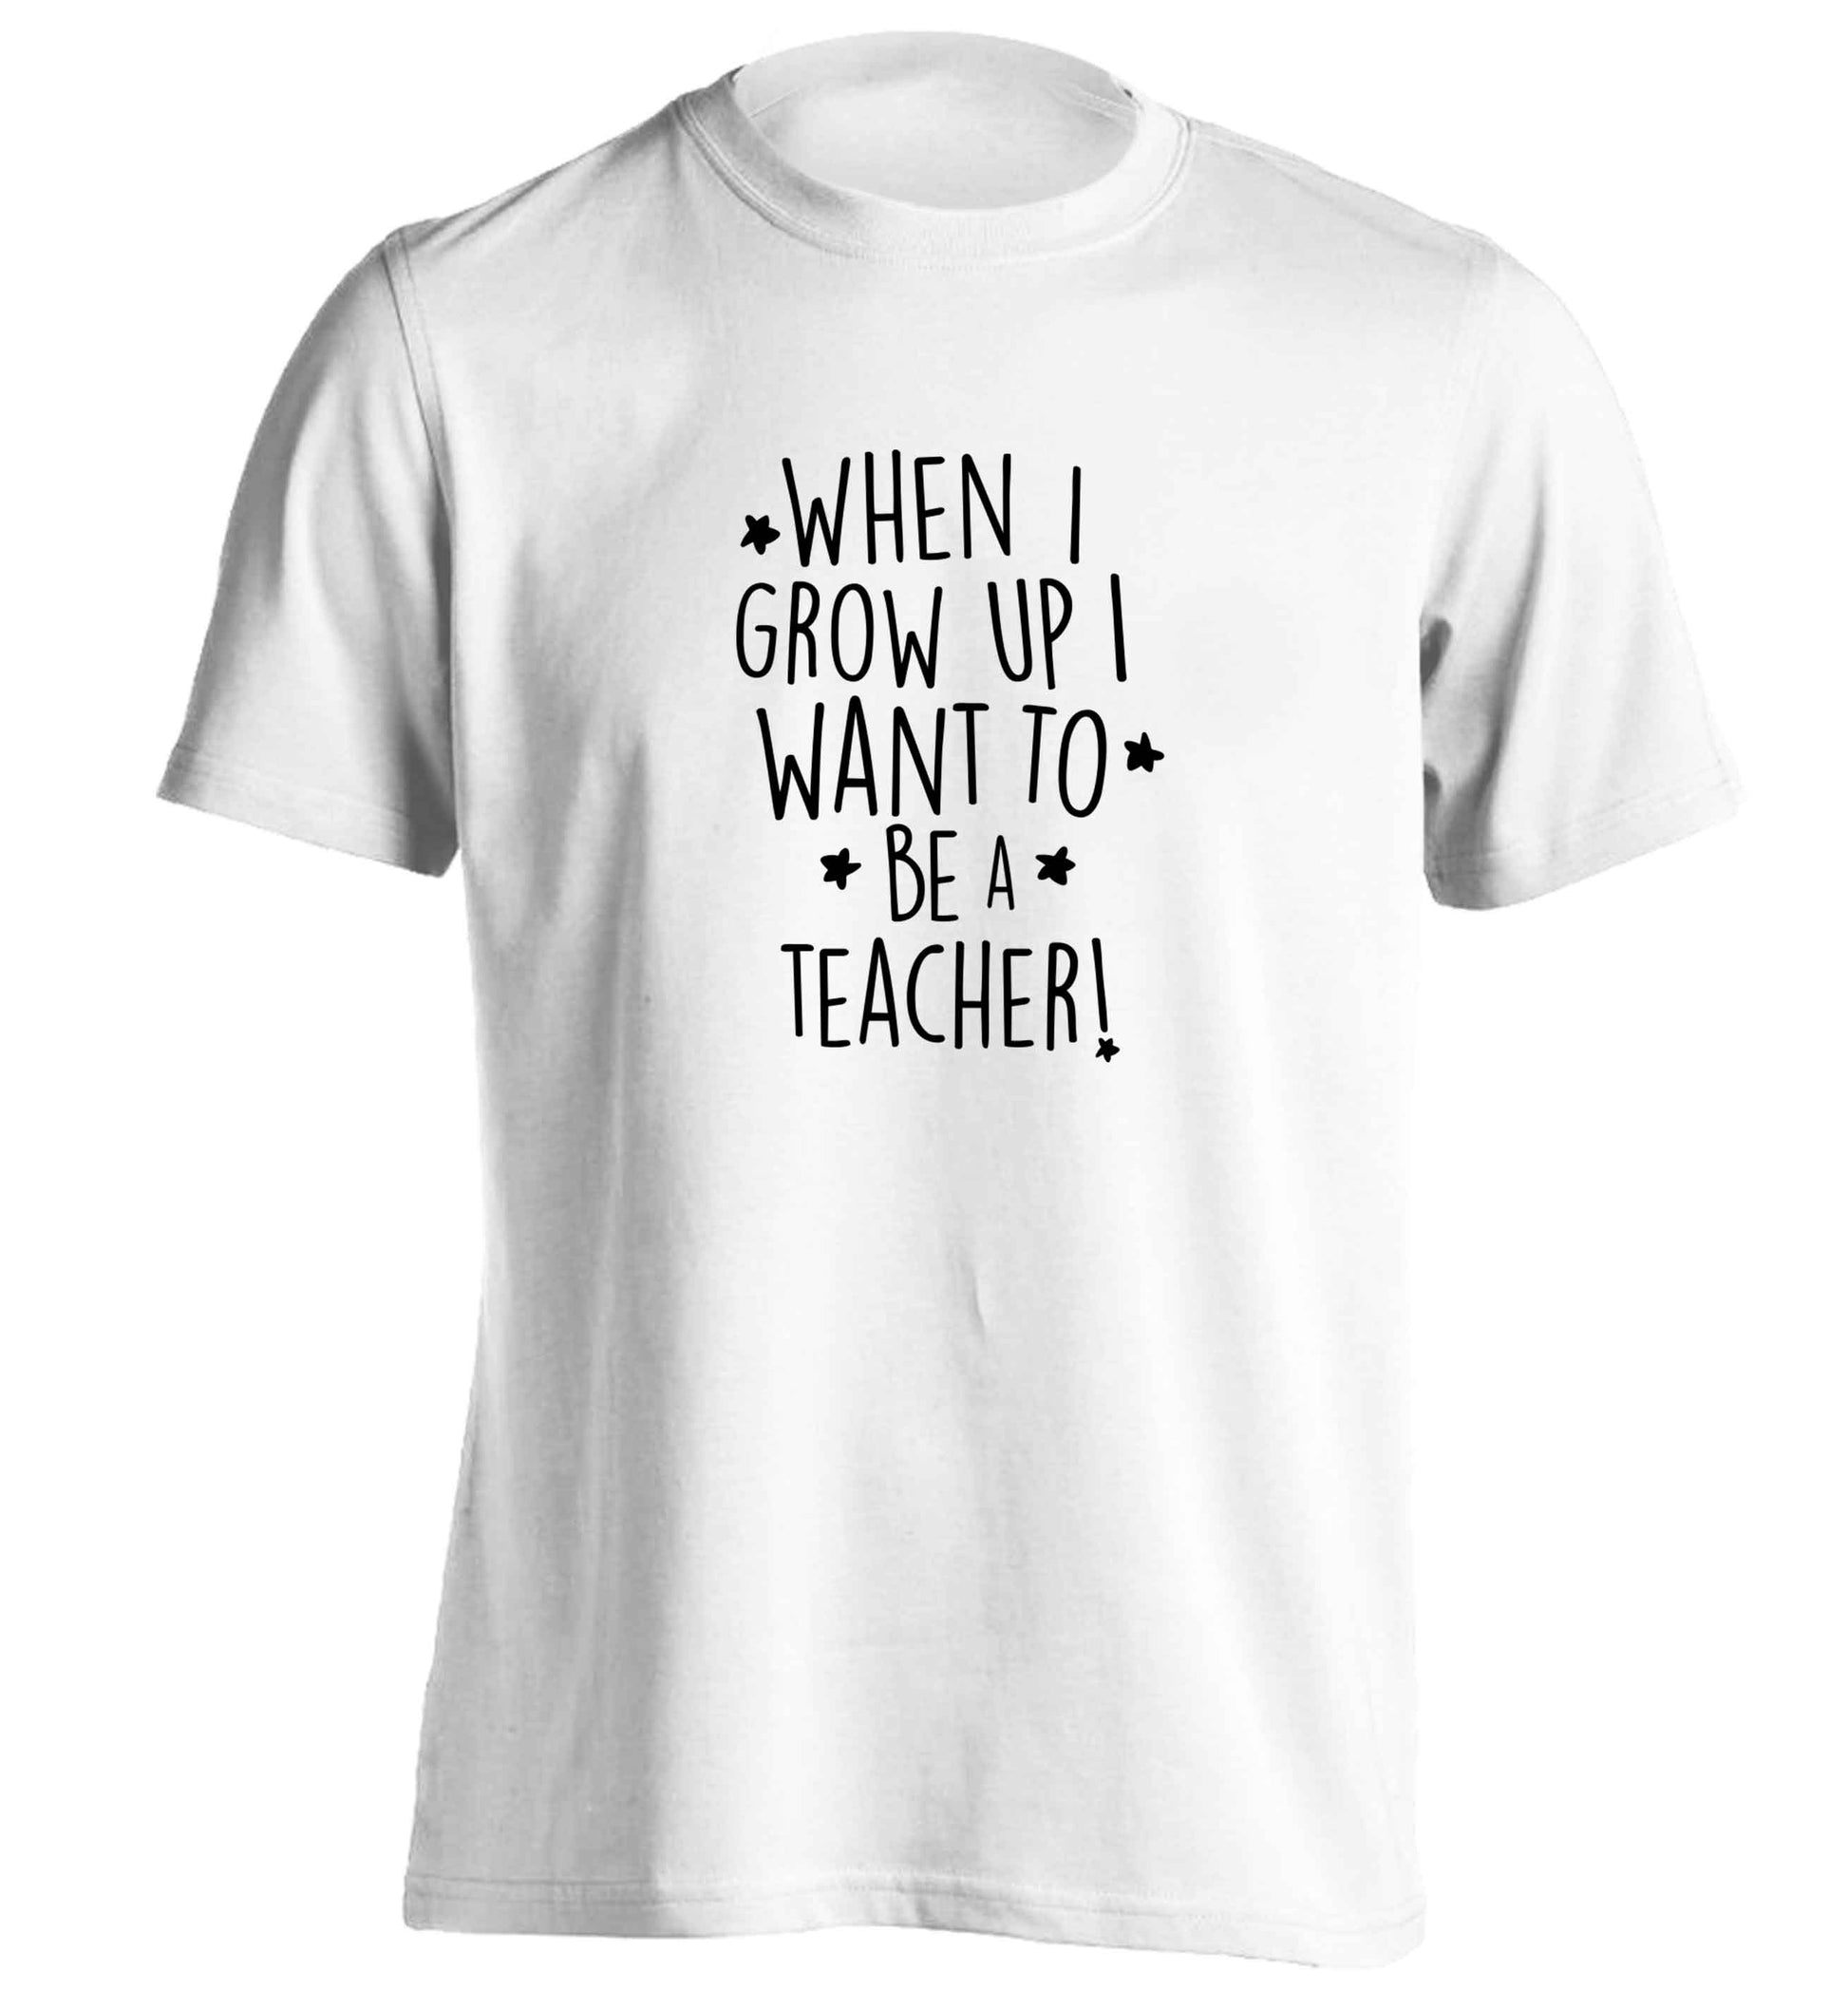 When I grow up I want to be a teacher adults unisex white Tshirt 2XL